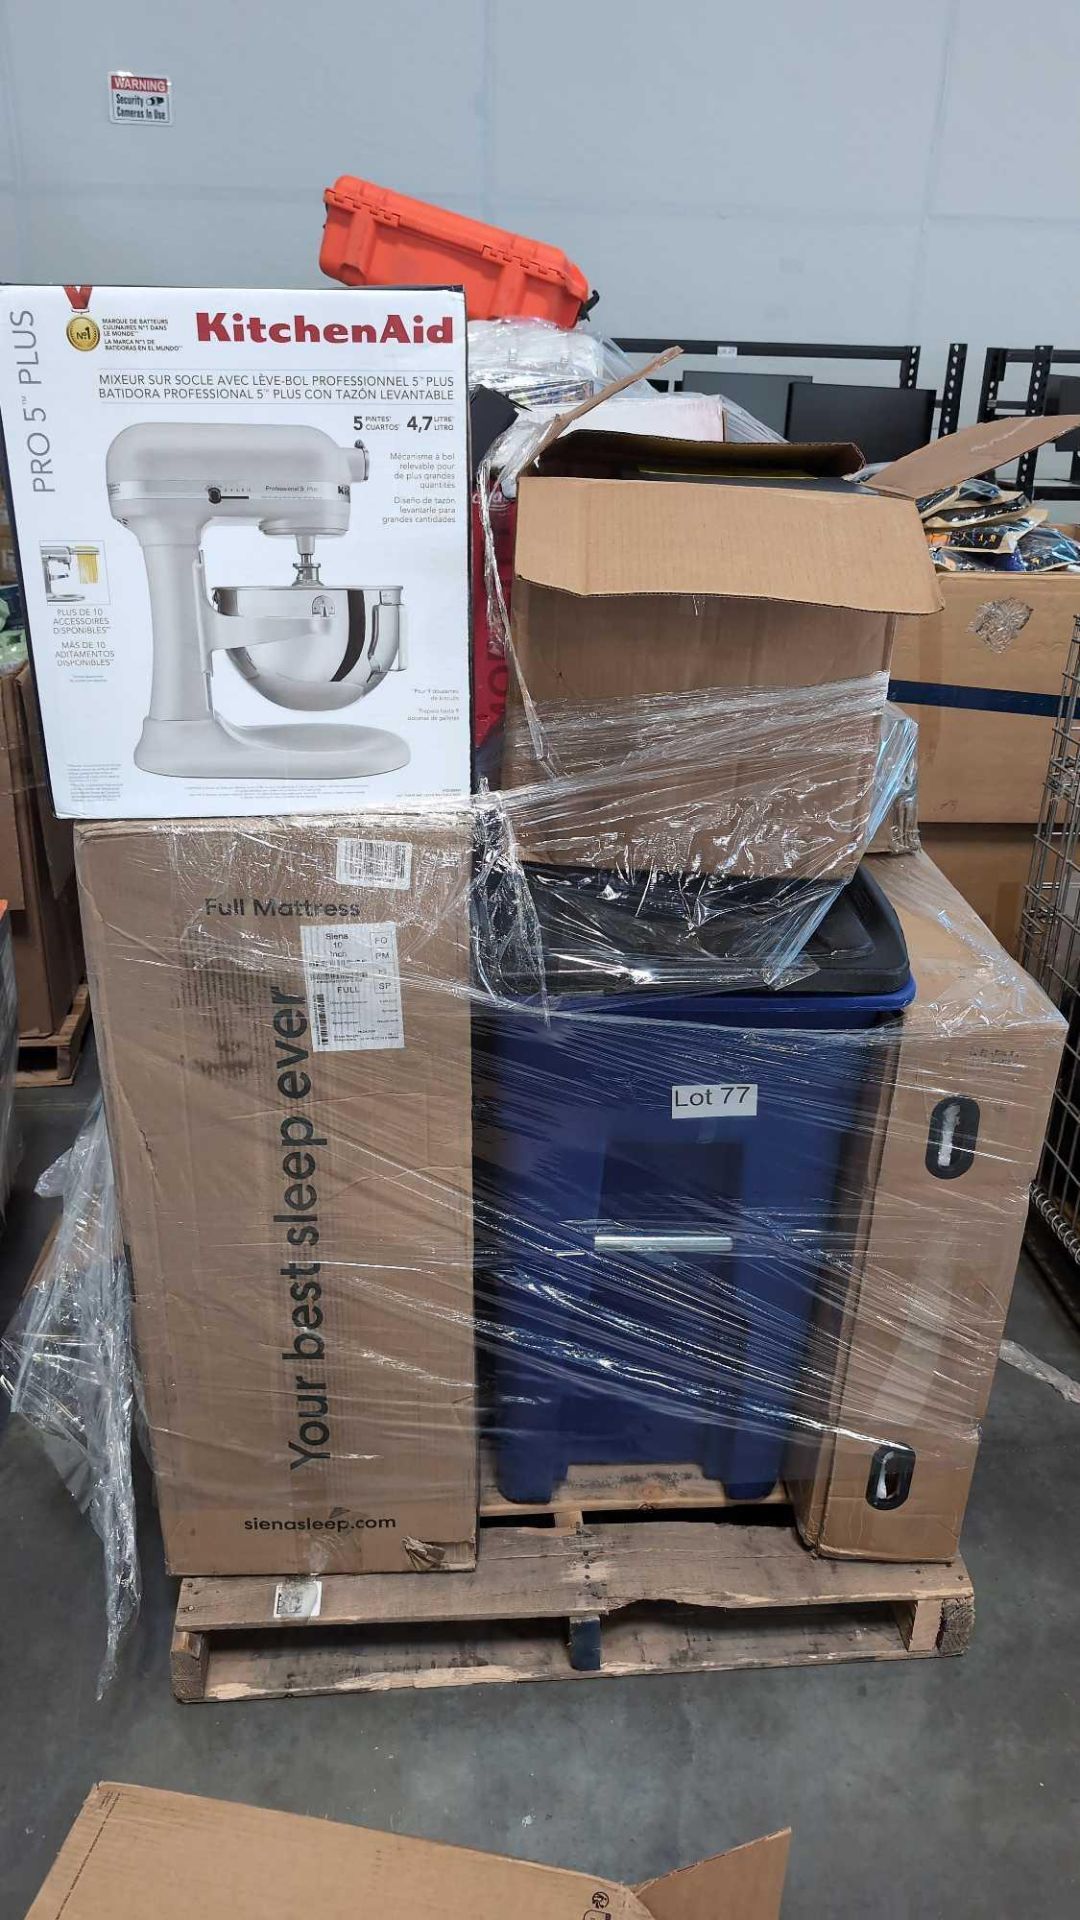 siena sleep, recycle can, Kitchen Aid 5 Pro Plus, pebble ice machine used?, knee walker and more - Image 12 of 12